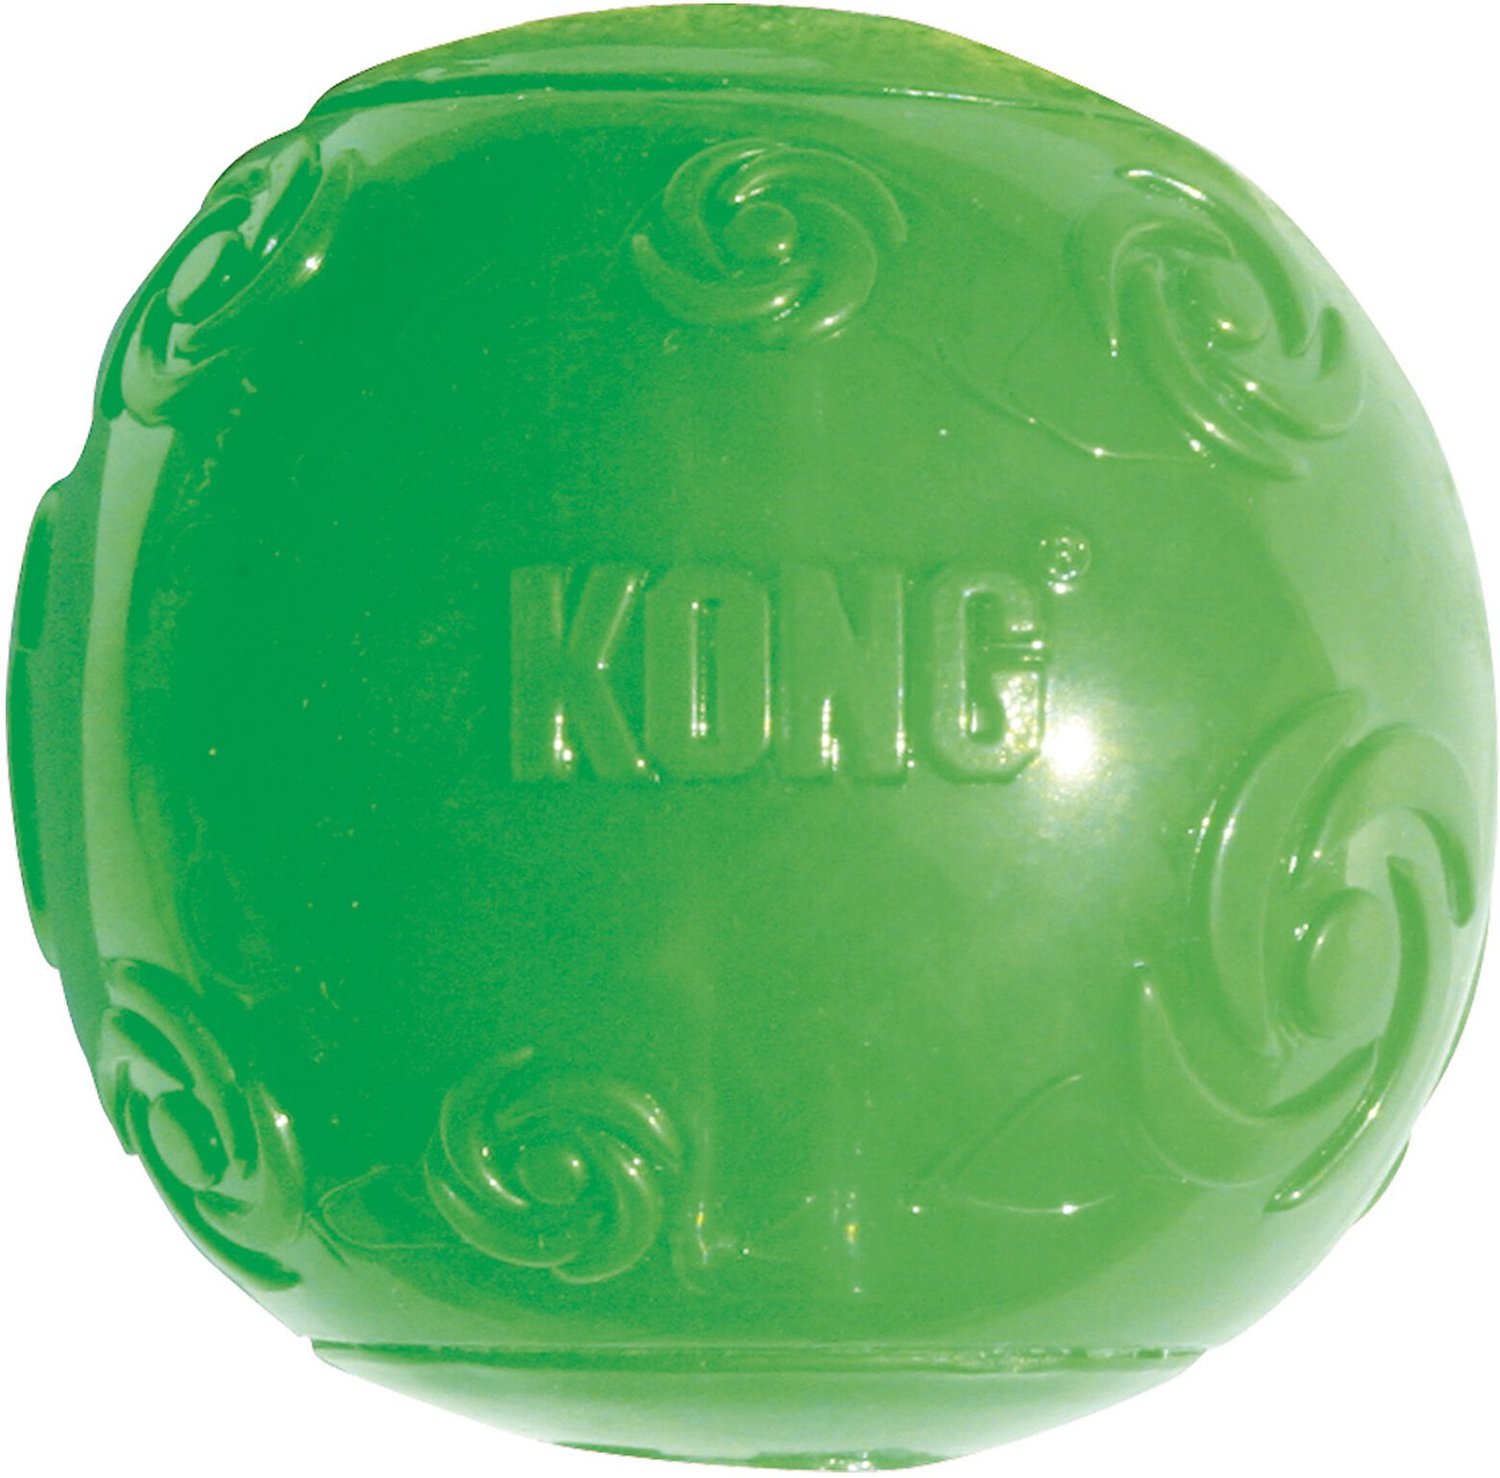 kong squeezz crackle ball